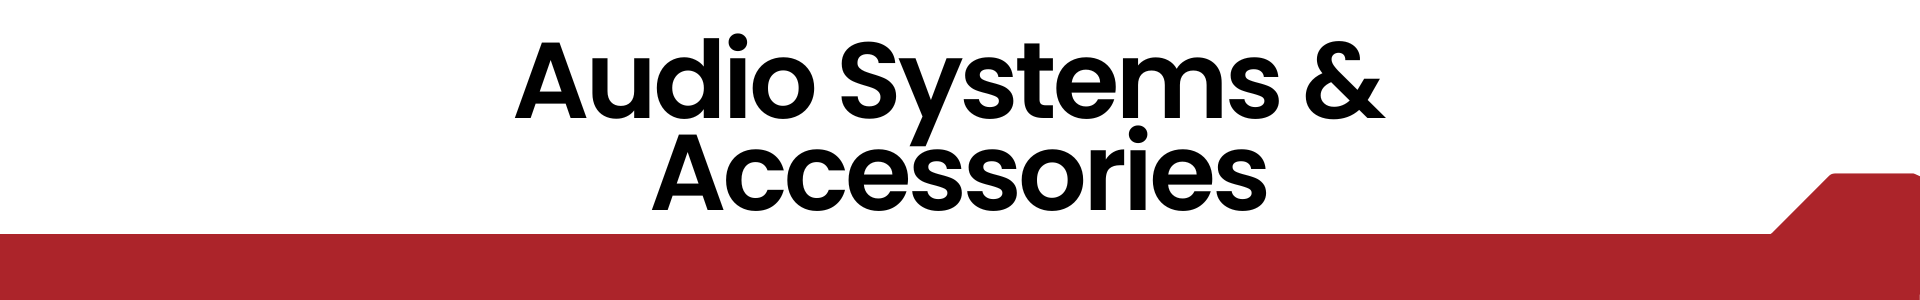 Audio Systems & Accessories